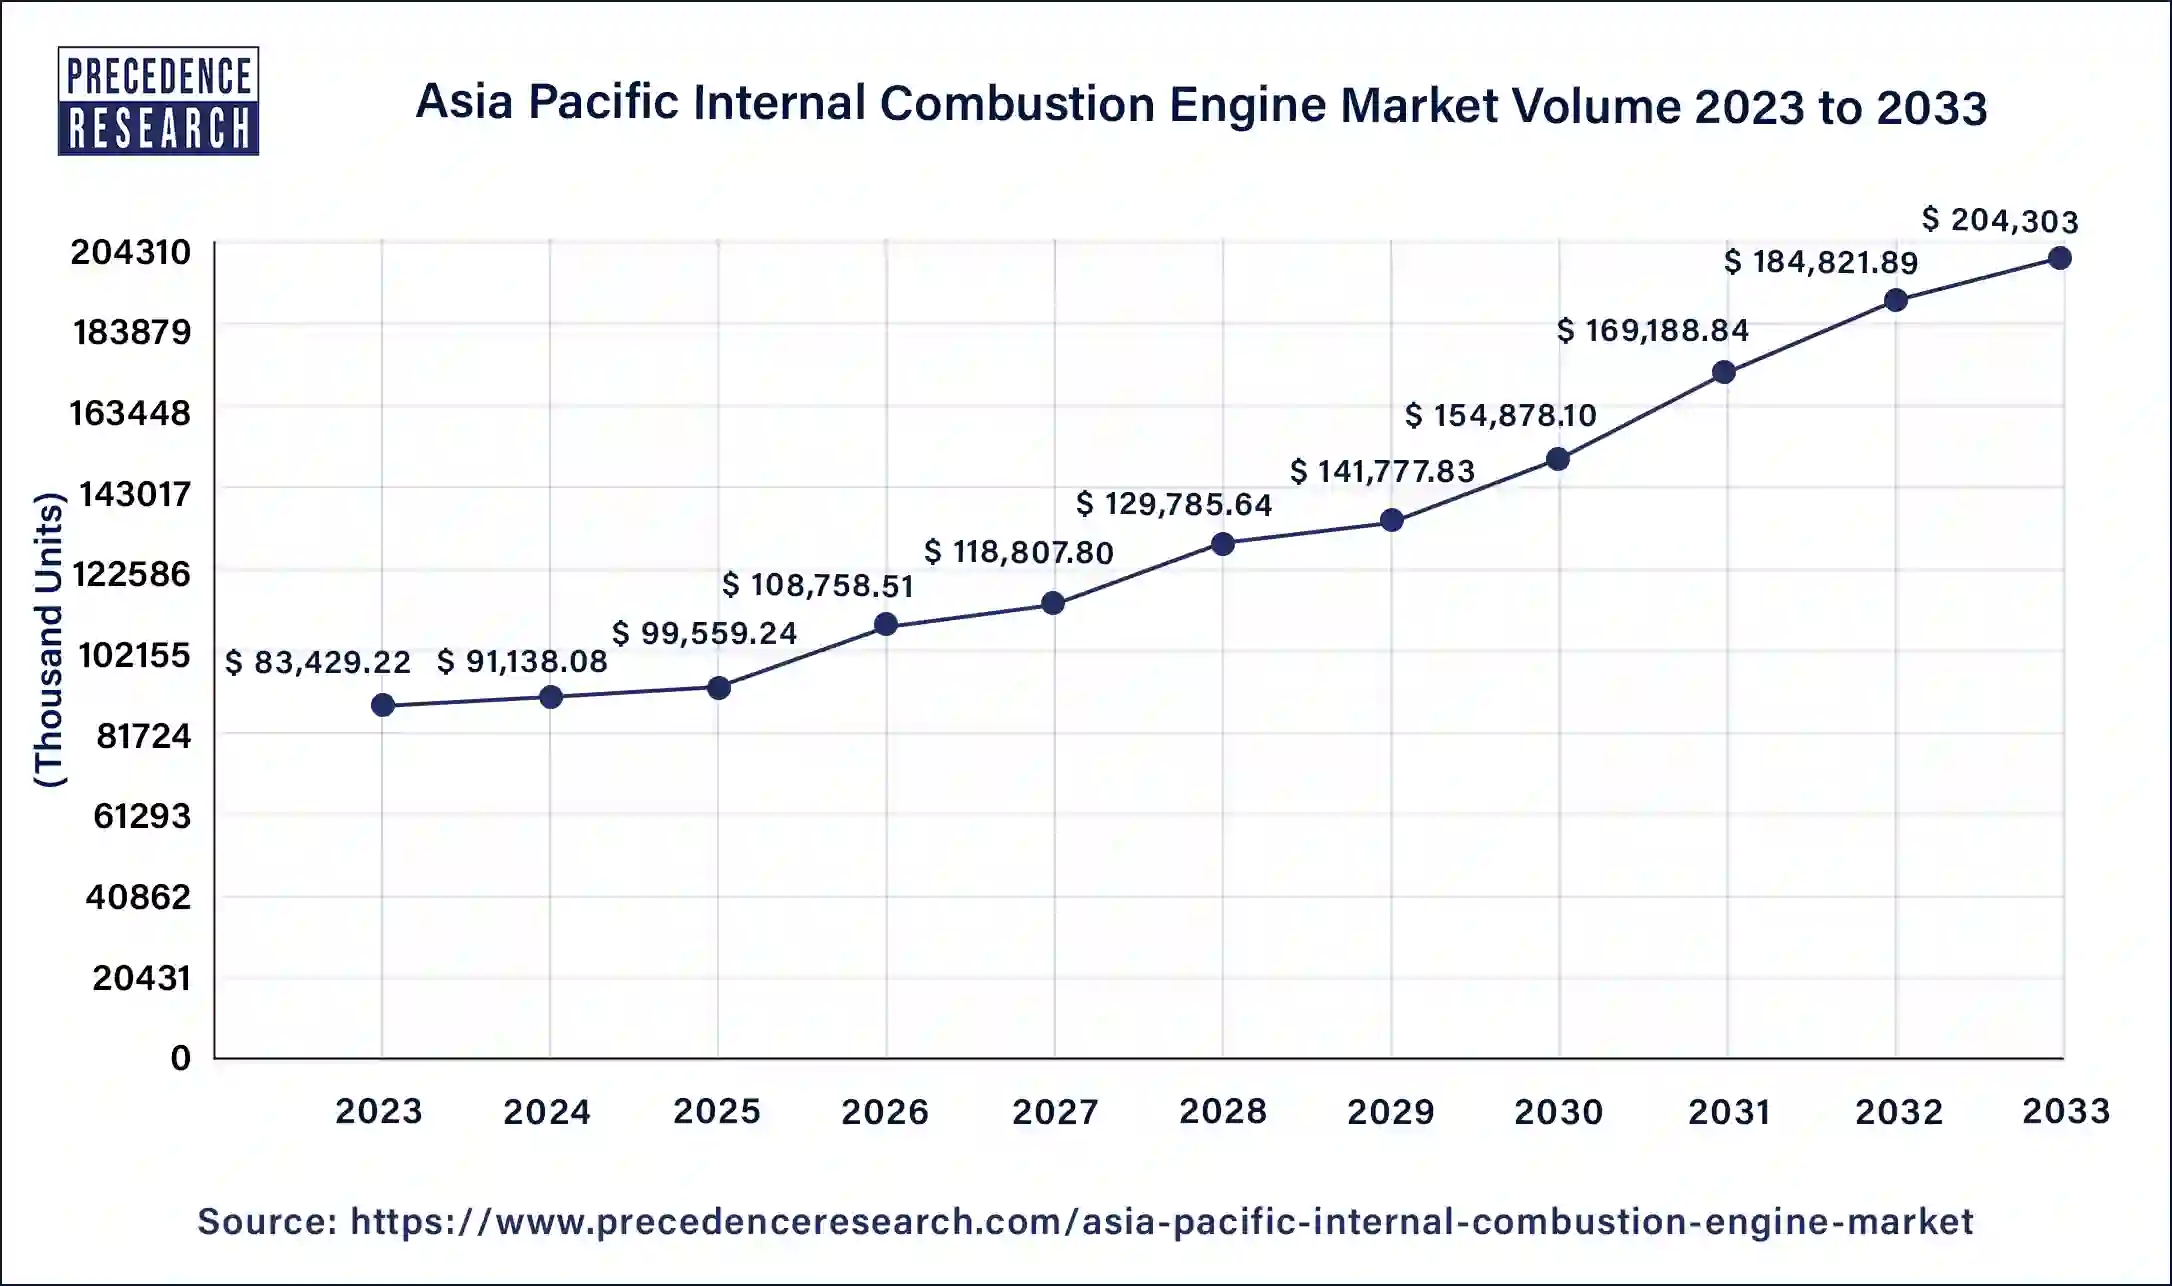 Asia Pacific Internal Combustion Engine Market Volume 2024 to 2033